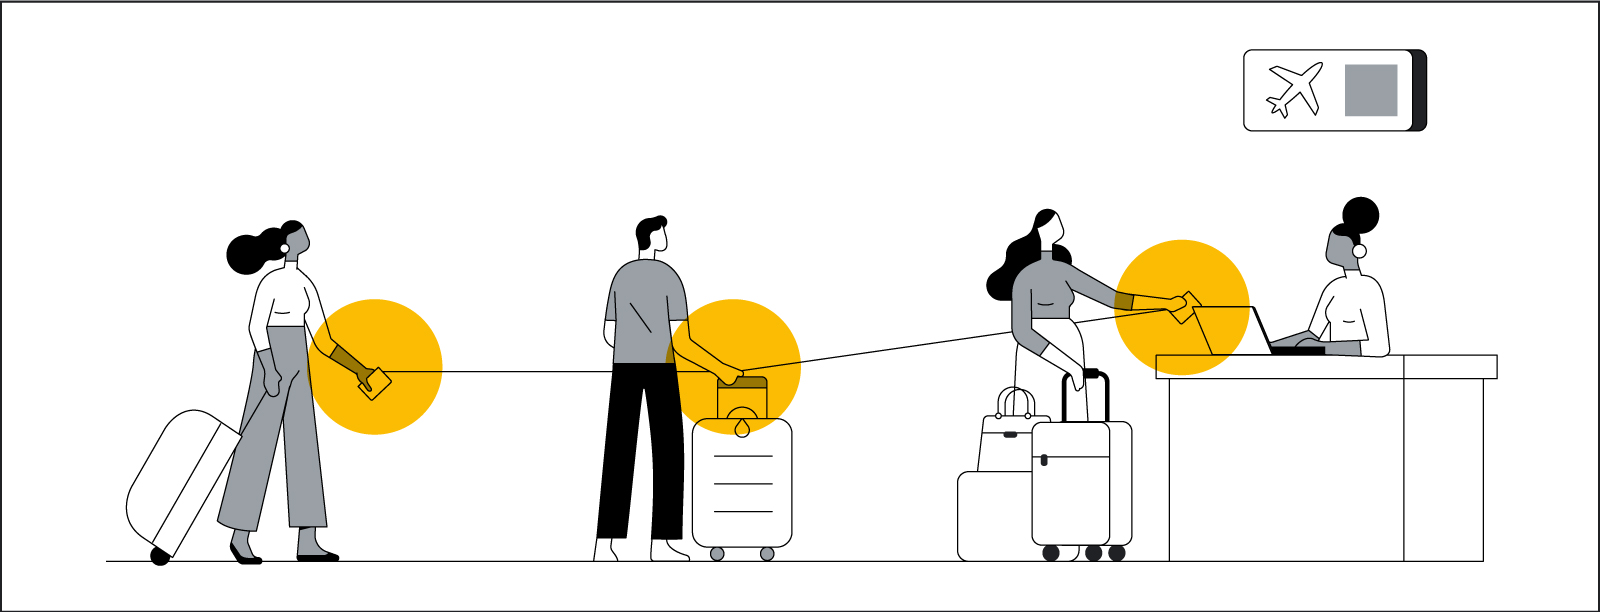 Illustrated people with rolling luggage wait in line at an airport check-in counter. They stand at a safe distance apart, their hands connected by a thin black line to the woman behind the counter.